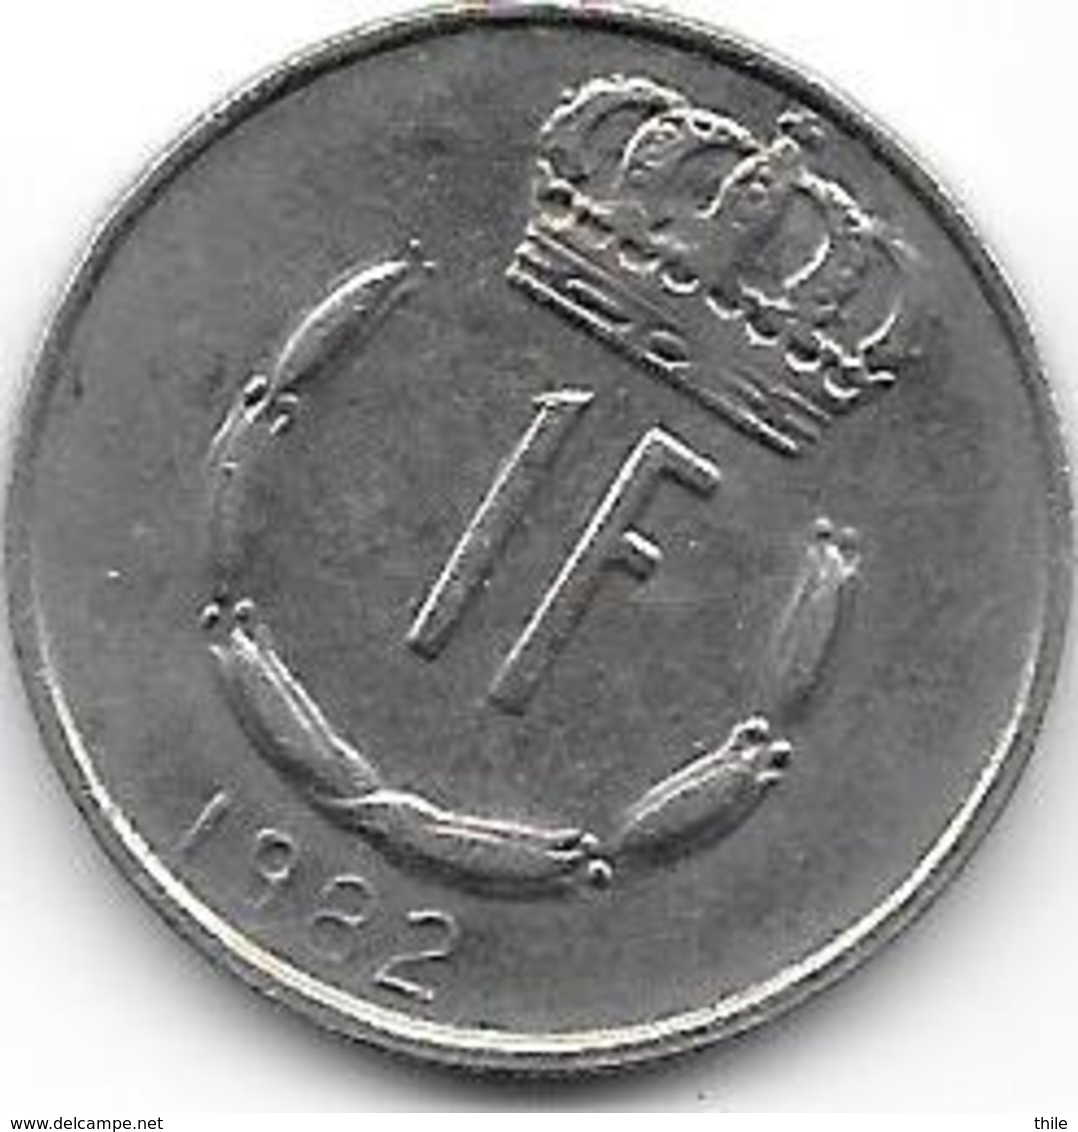 LUXEMBOURG - 1 Franc 1982 - Luxembourg